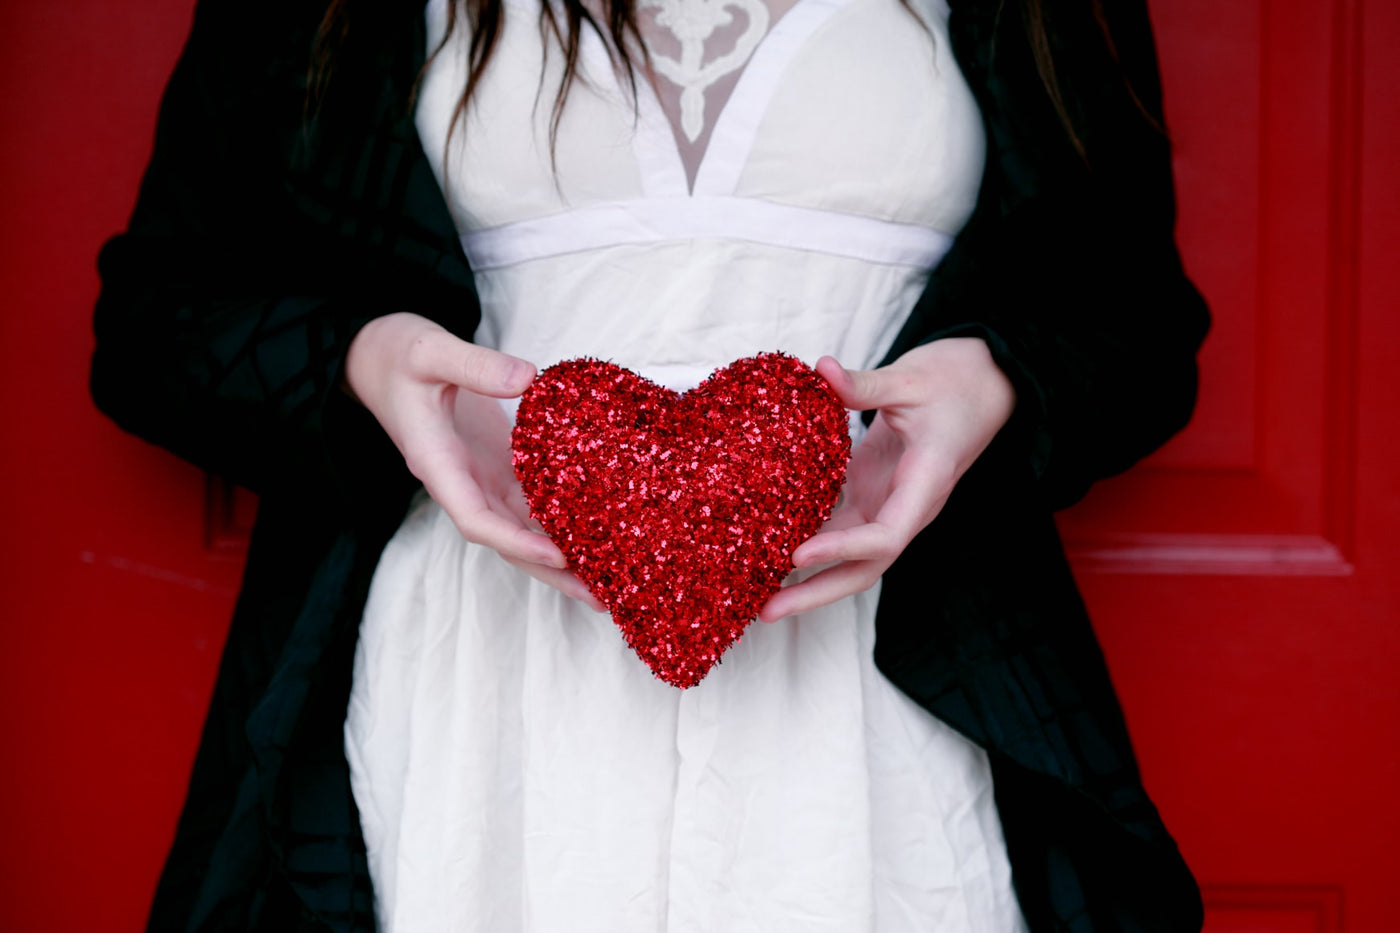 WHAT TO DO WHEN YOU'RE SINGLE ON VALENTINE'S DAY